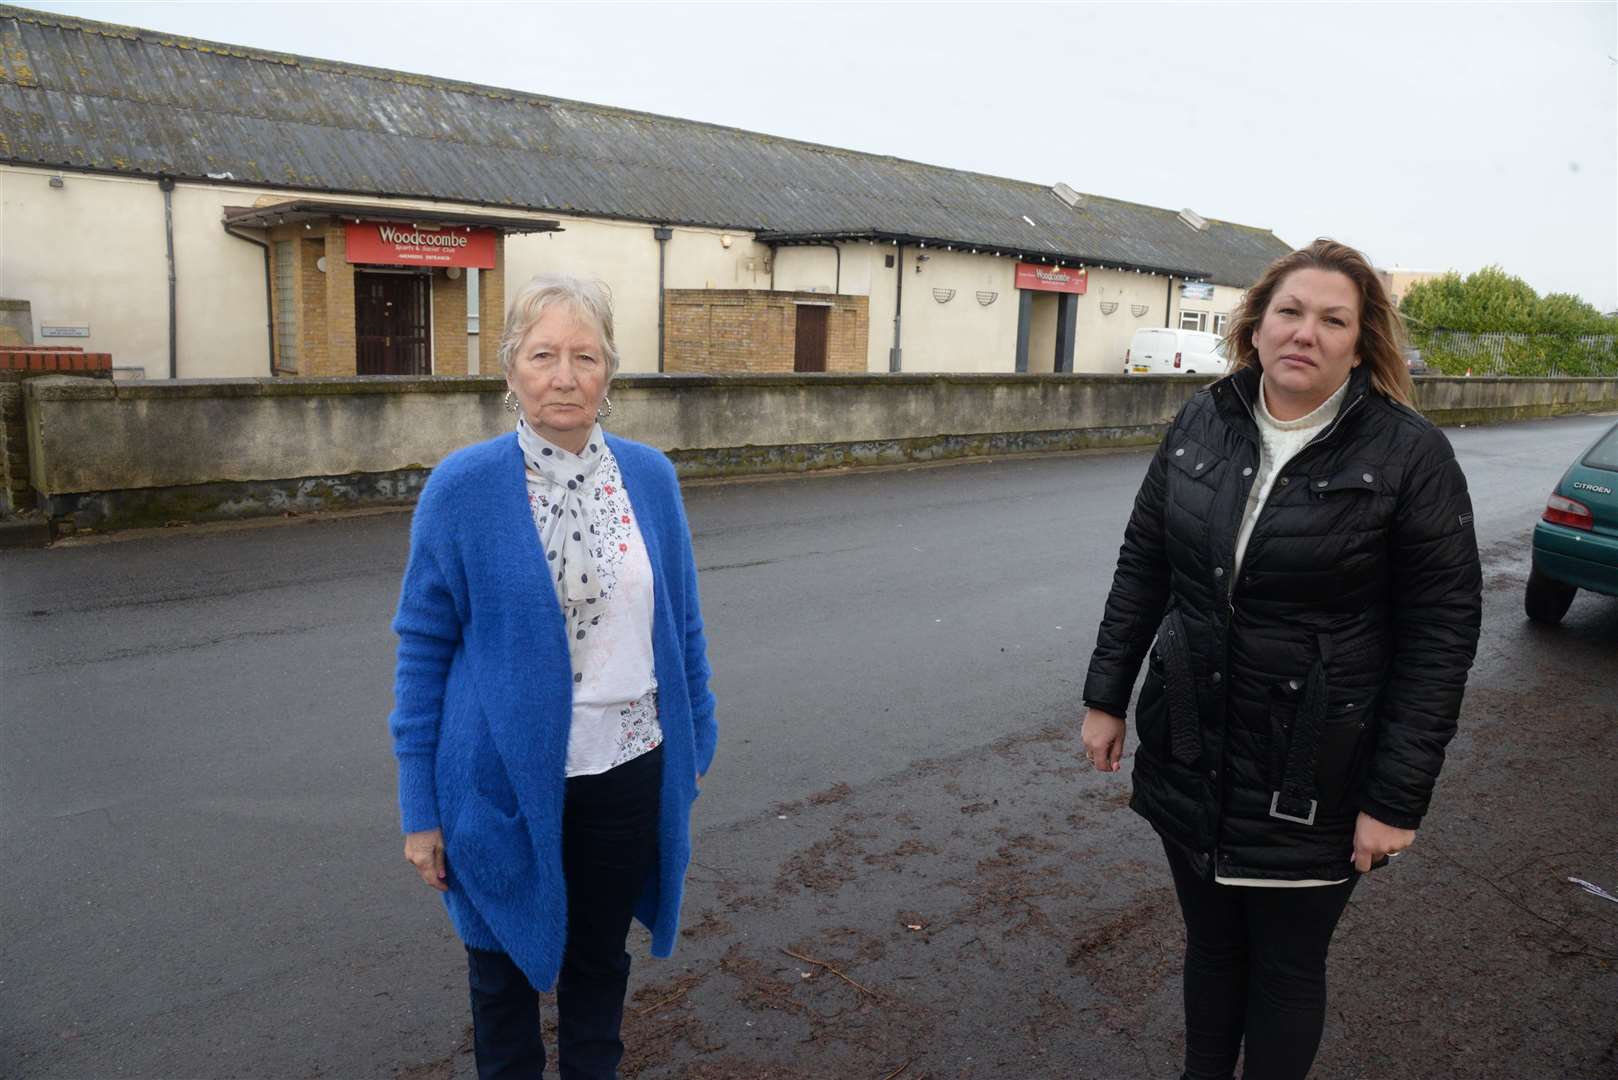 Marie Rutherford and fellow resident Lisa East of Church Road are unhappy about plans to build houses on the tennis court at the Woodcoombe Sports and Social Club. Picture: Chris Davey